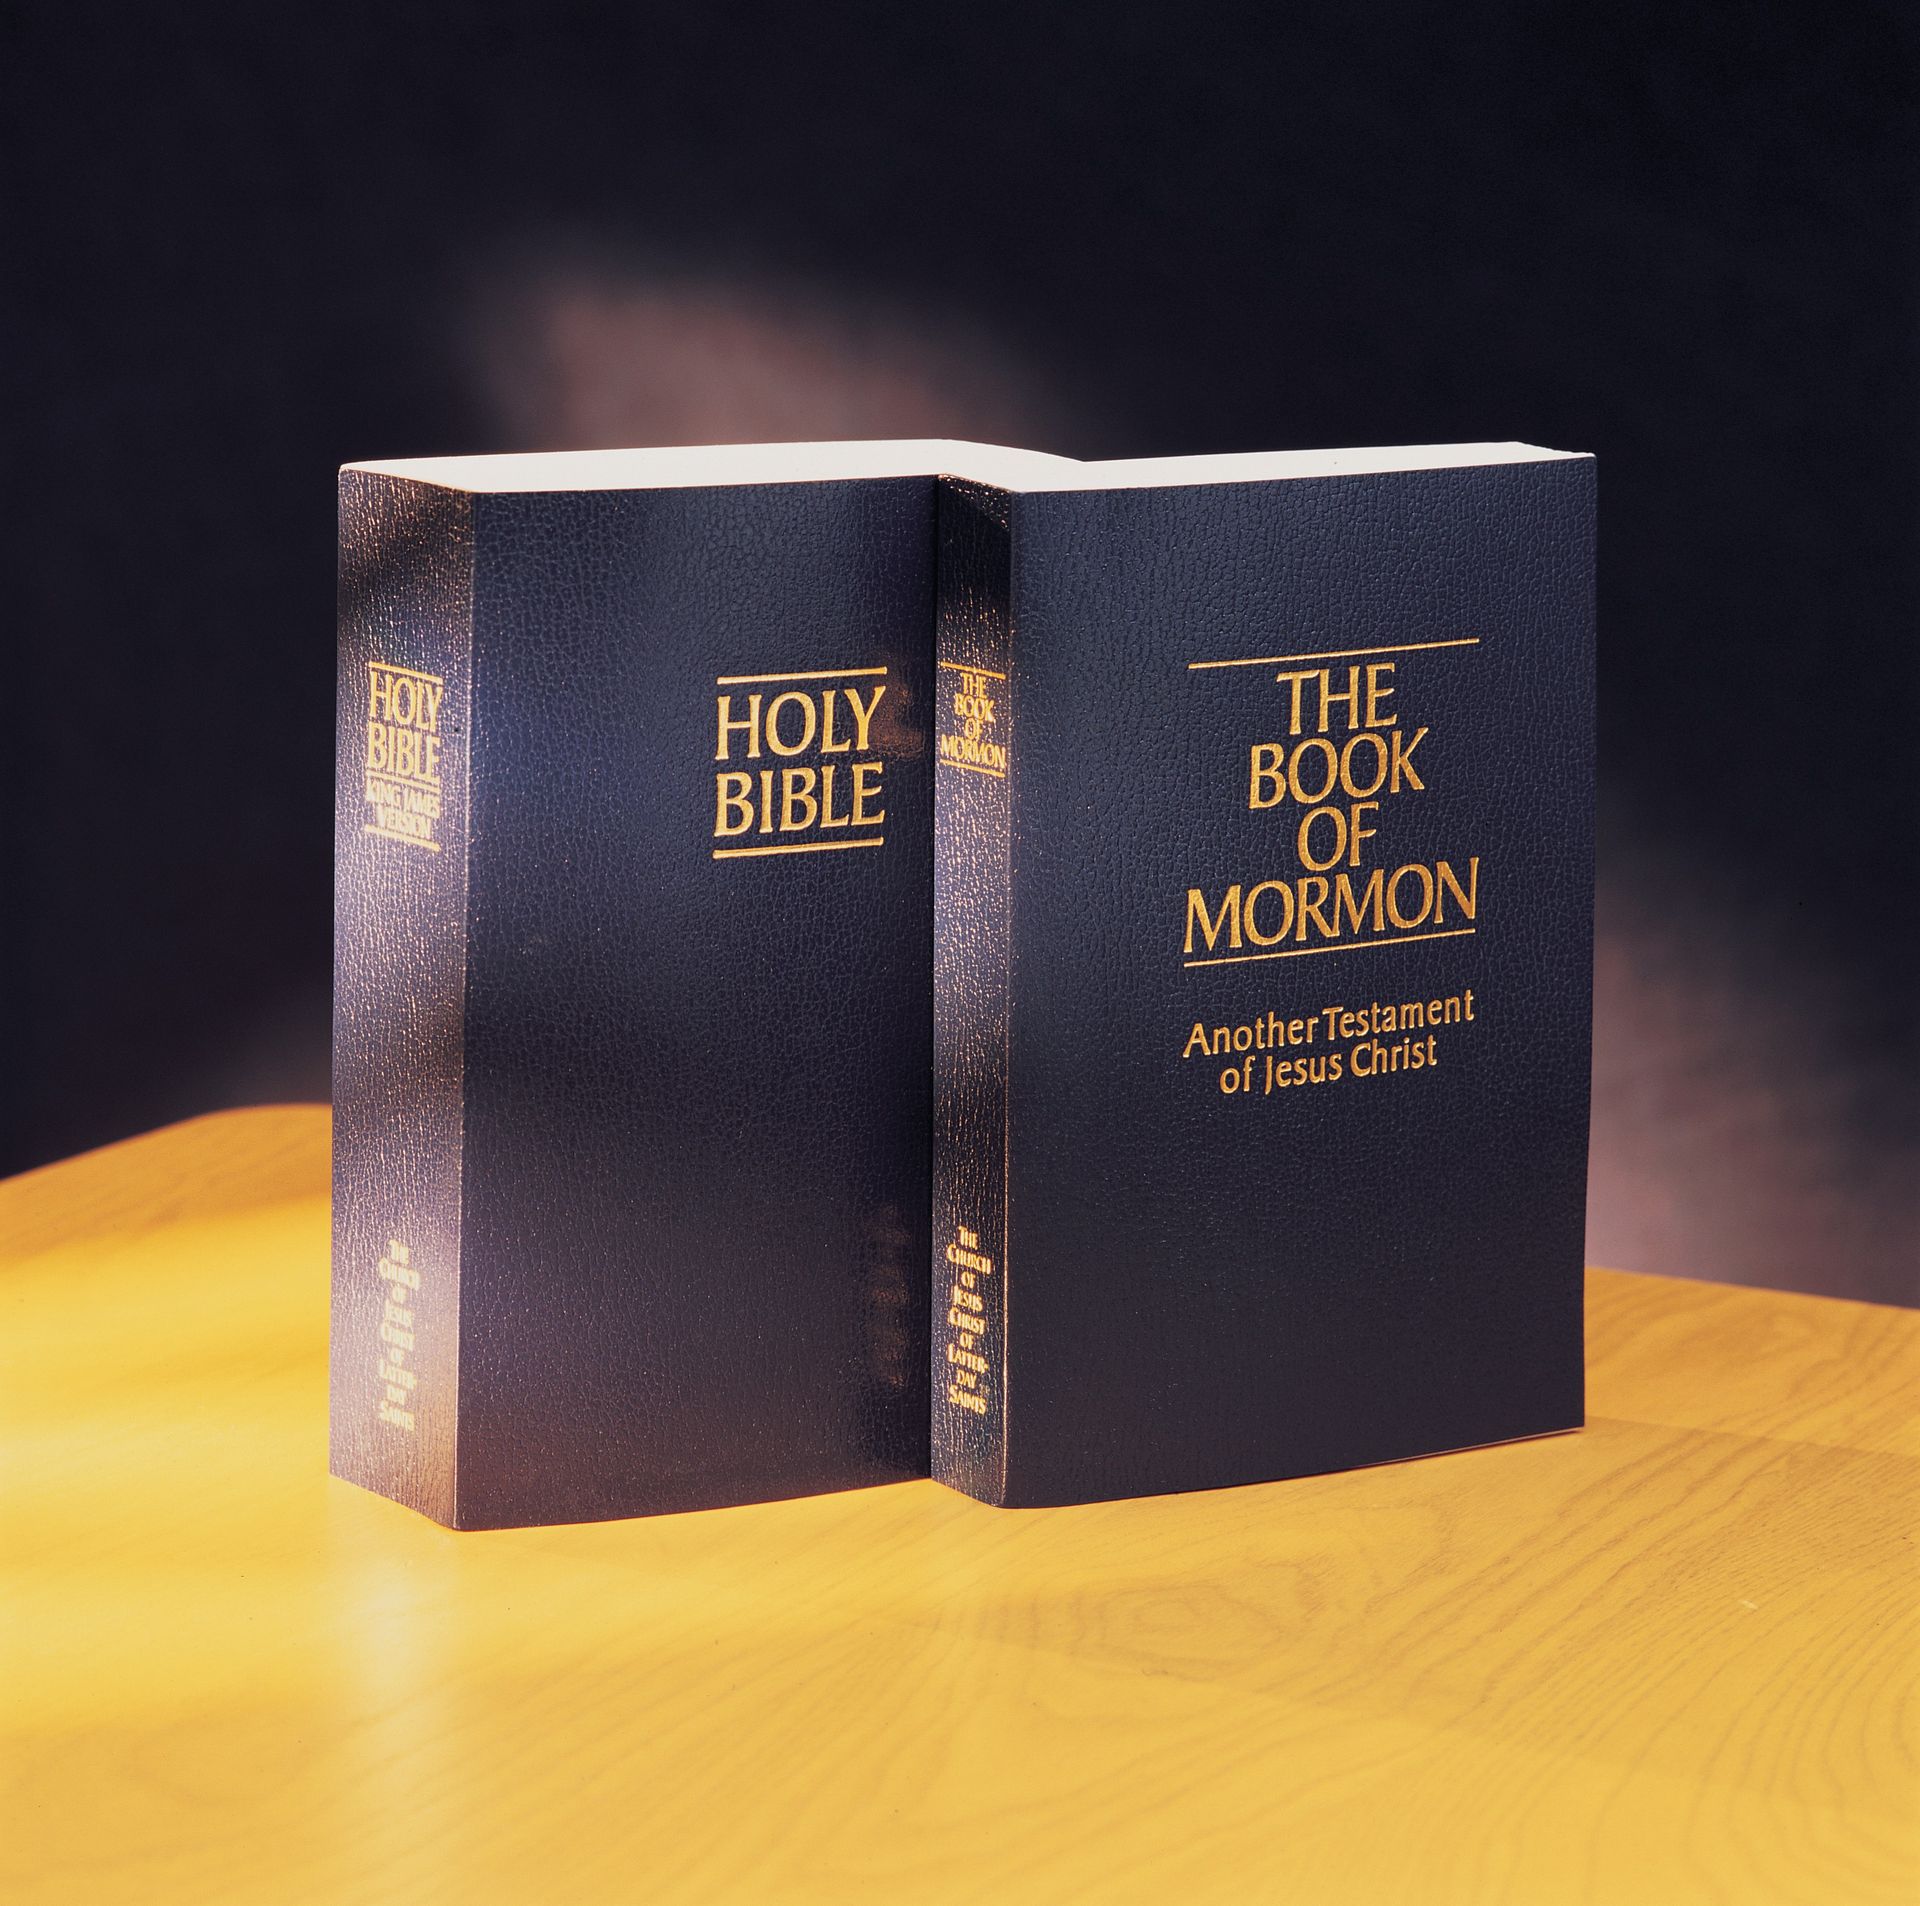 A Bible and a Book of Mormon on a table.